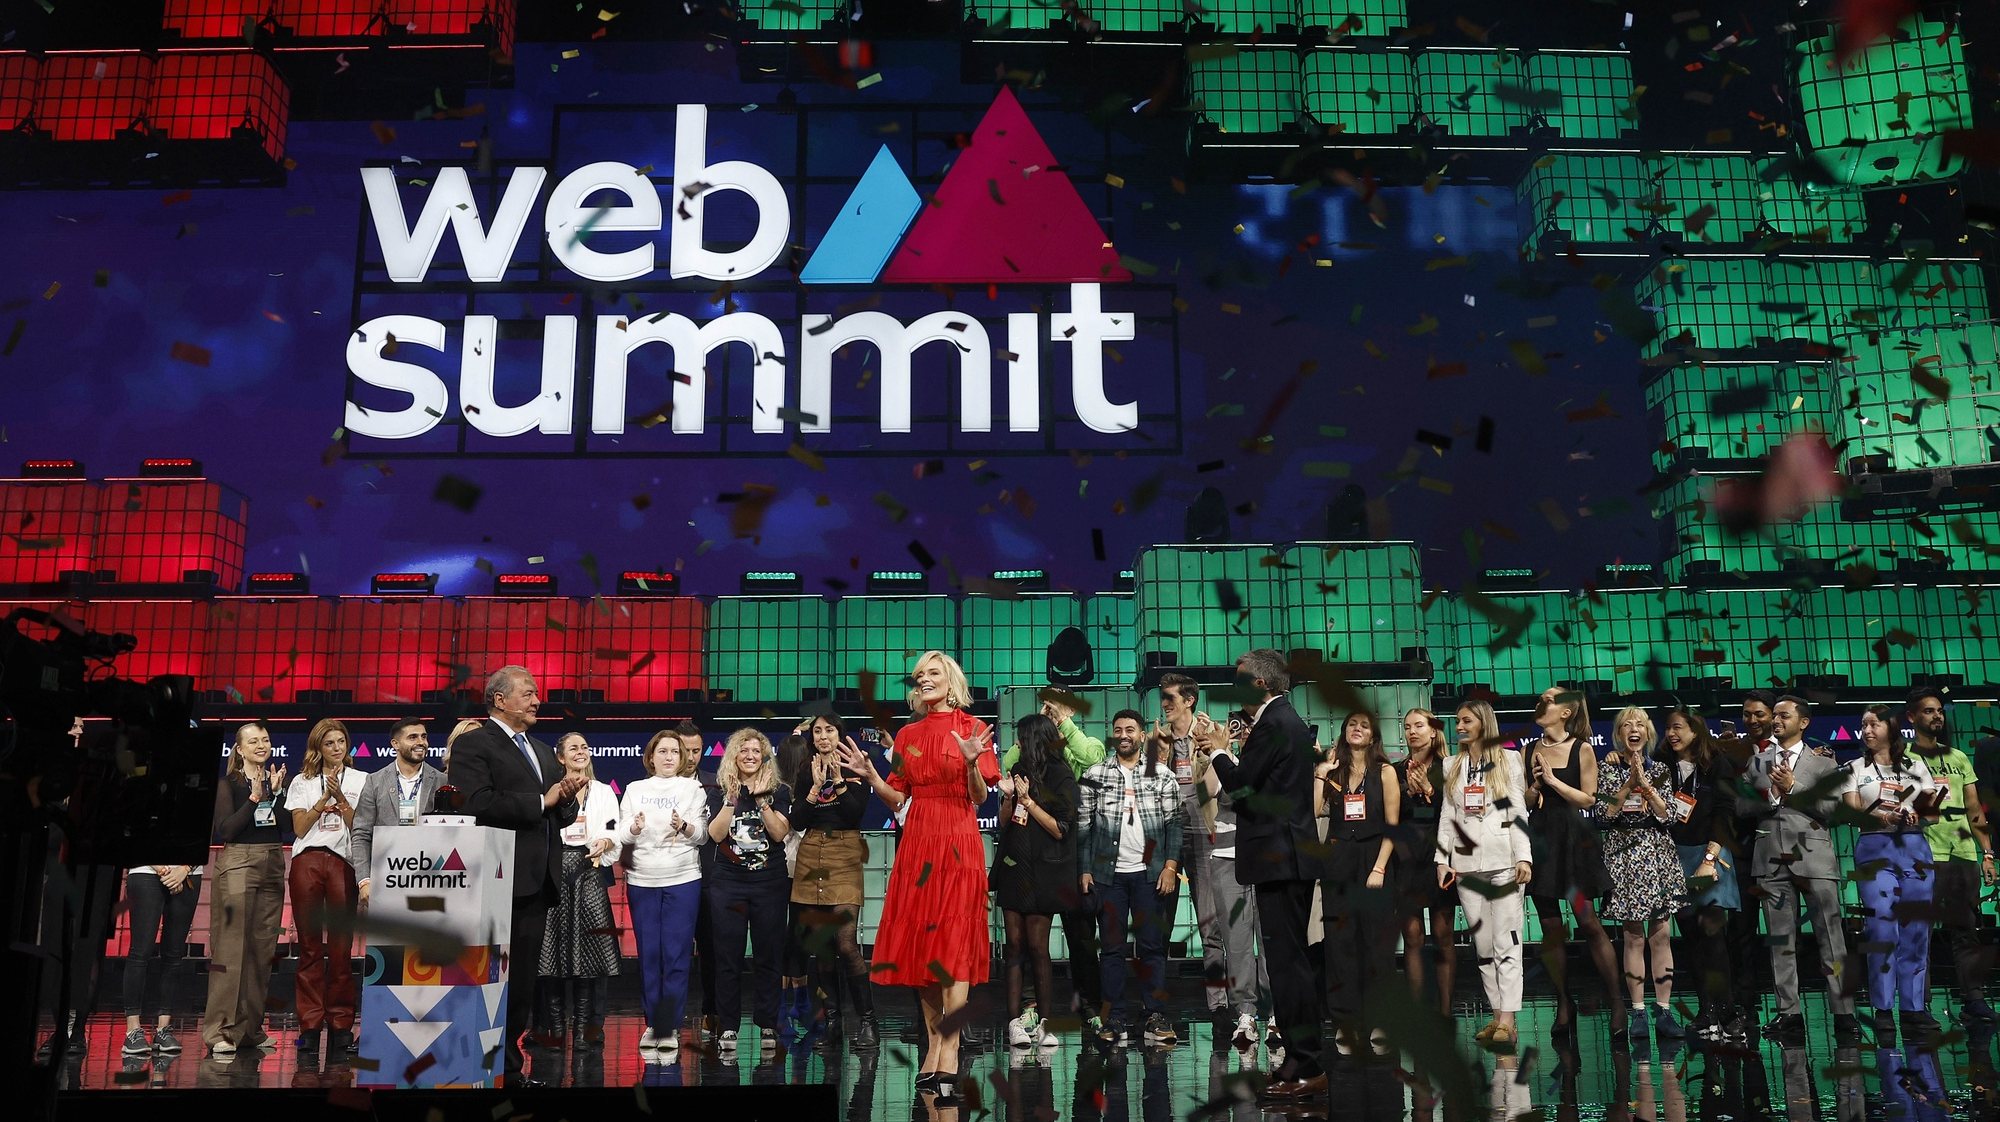 Web Summit CEO Katherine Maher (C), flanked by Lisbon Mayor, Carlos Moedas (R), and the Portuguese Economy and Sea minister, Antonio Costa Silva (L), during the opening ceremony of the 2023 Web Summit in Lisbon, Portugal, 13 November 2023. The Web Summit is considered the largest event of startups and technological entrepreneurship in the world and takes place from 13 to 16 of November in Lisbon. ANTÓNIO PEDRO SANTOS/LUSA